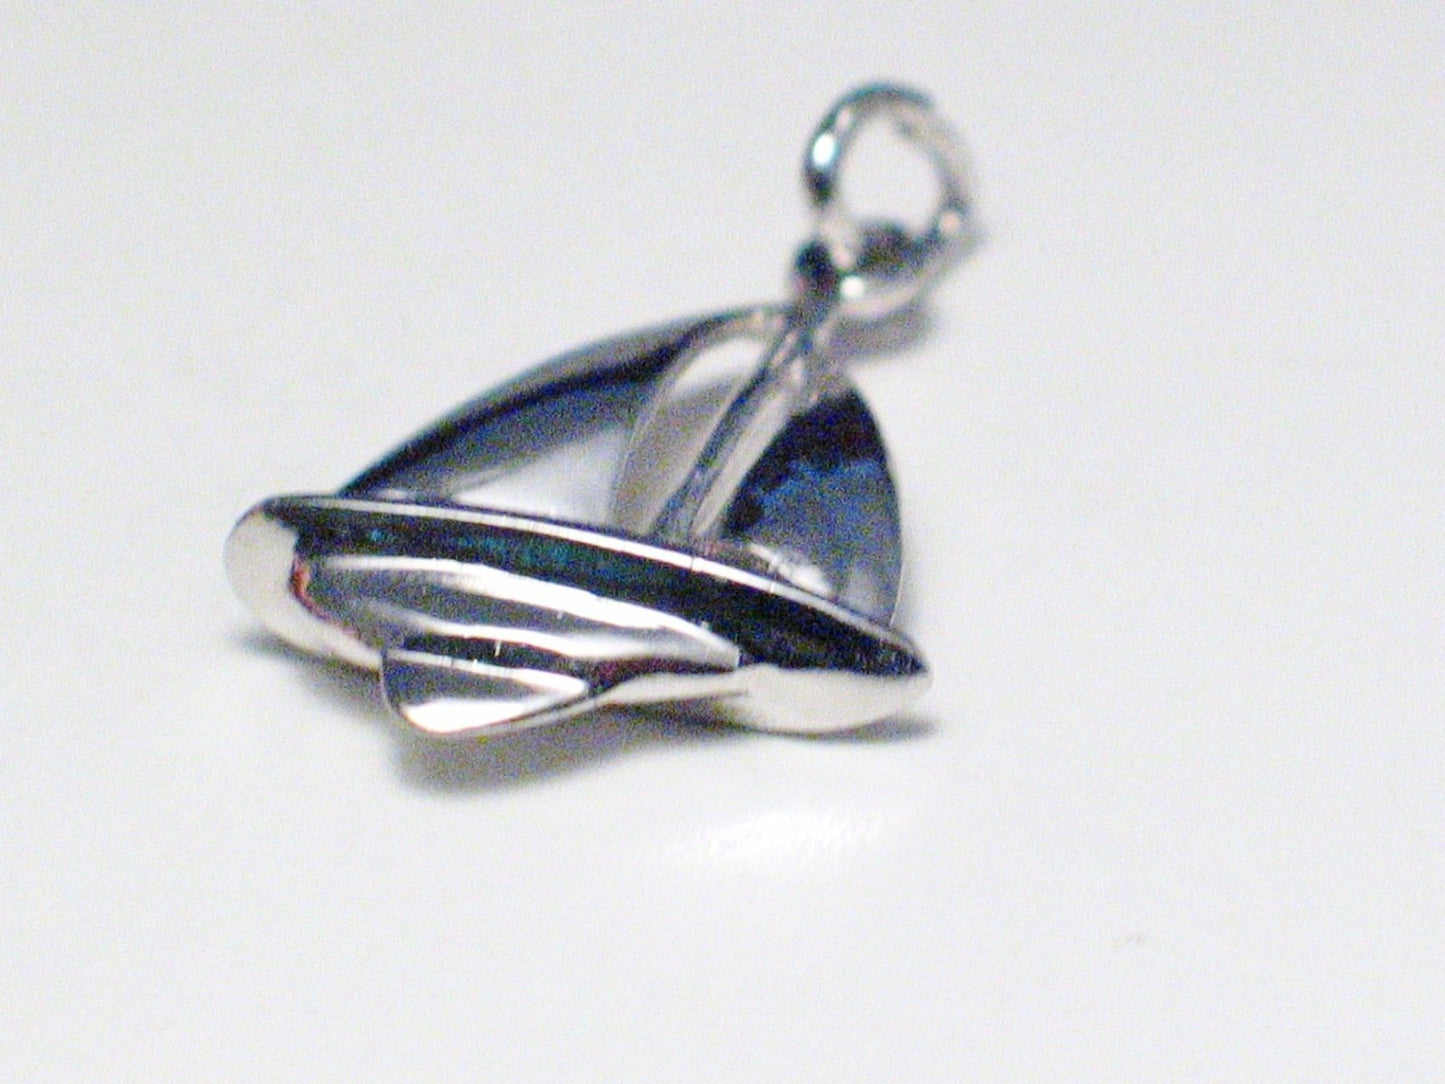 Sterling Silver Sailboat Charm Sailing Boating Nautical Theme 925 Jewelry - Blingschlingers Jewelry